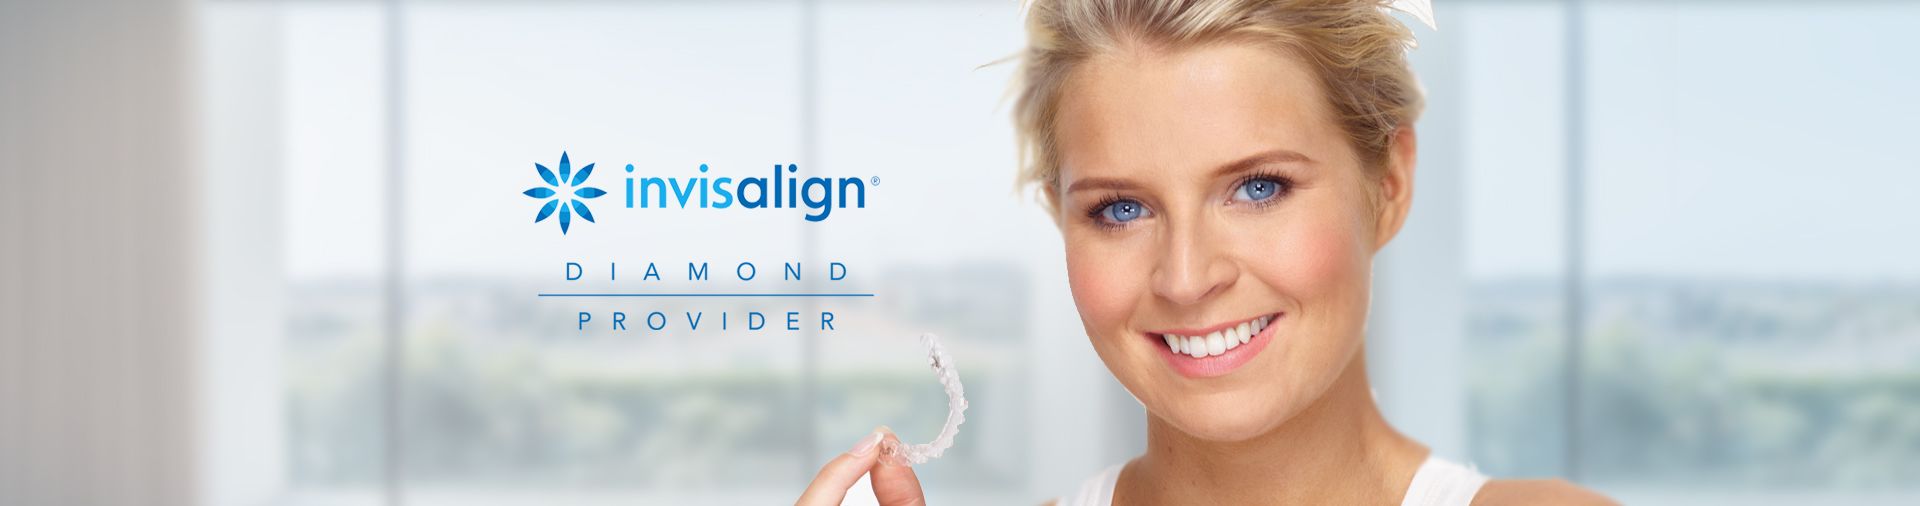 Why choose Invisalign